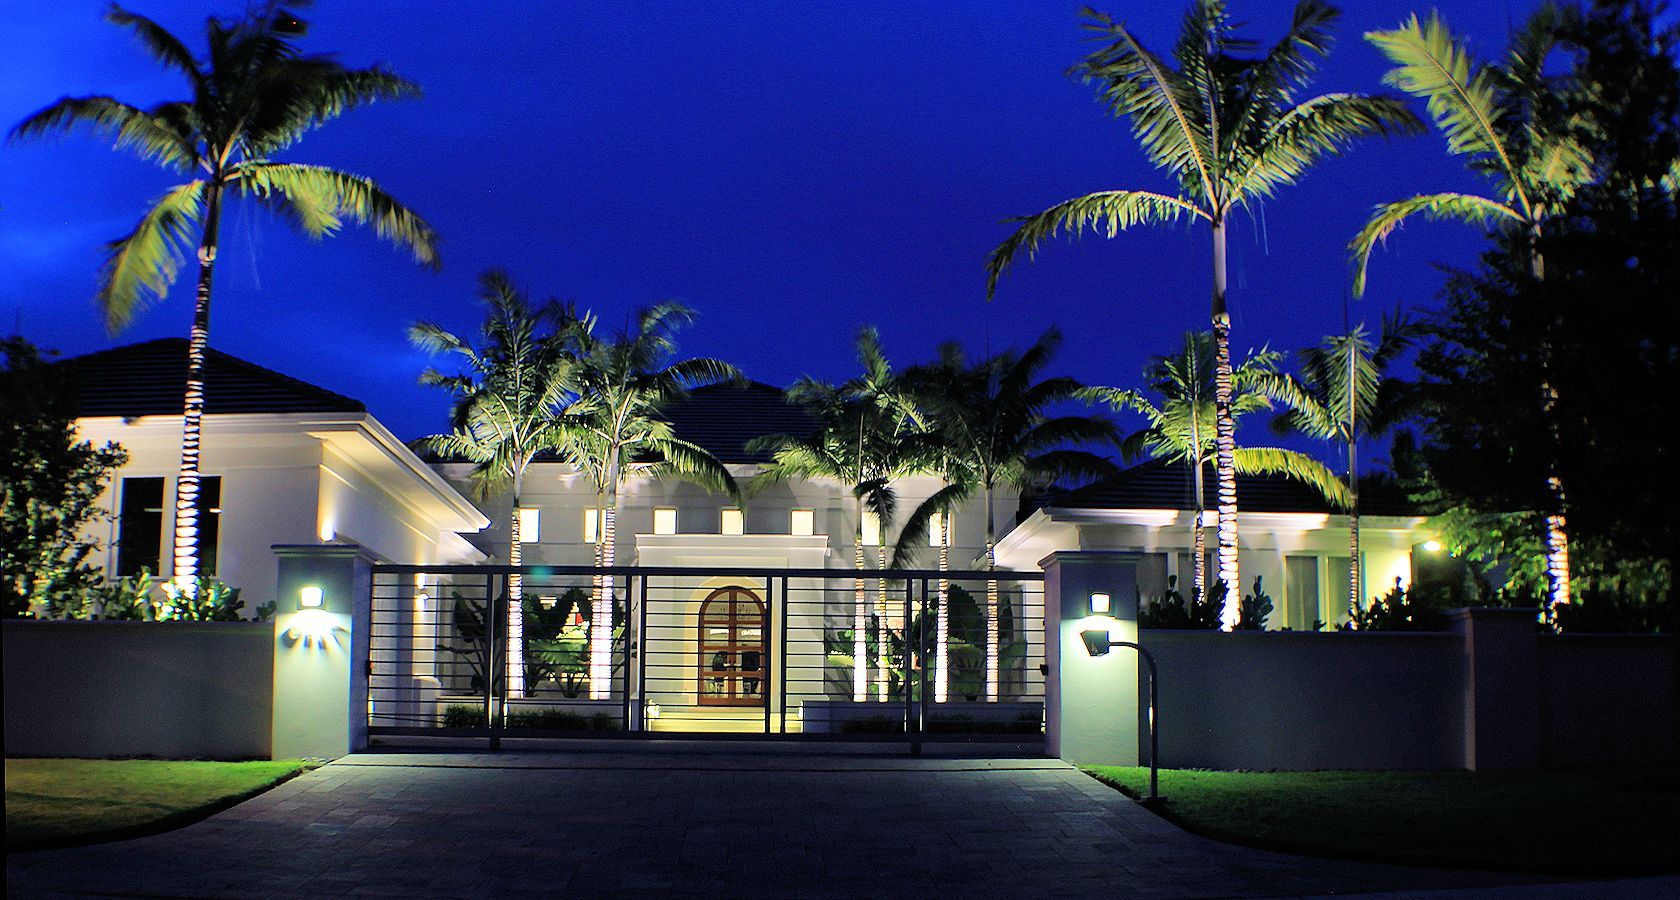 Architectural Lighting by Lampscape Lighting of Miami